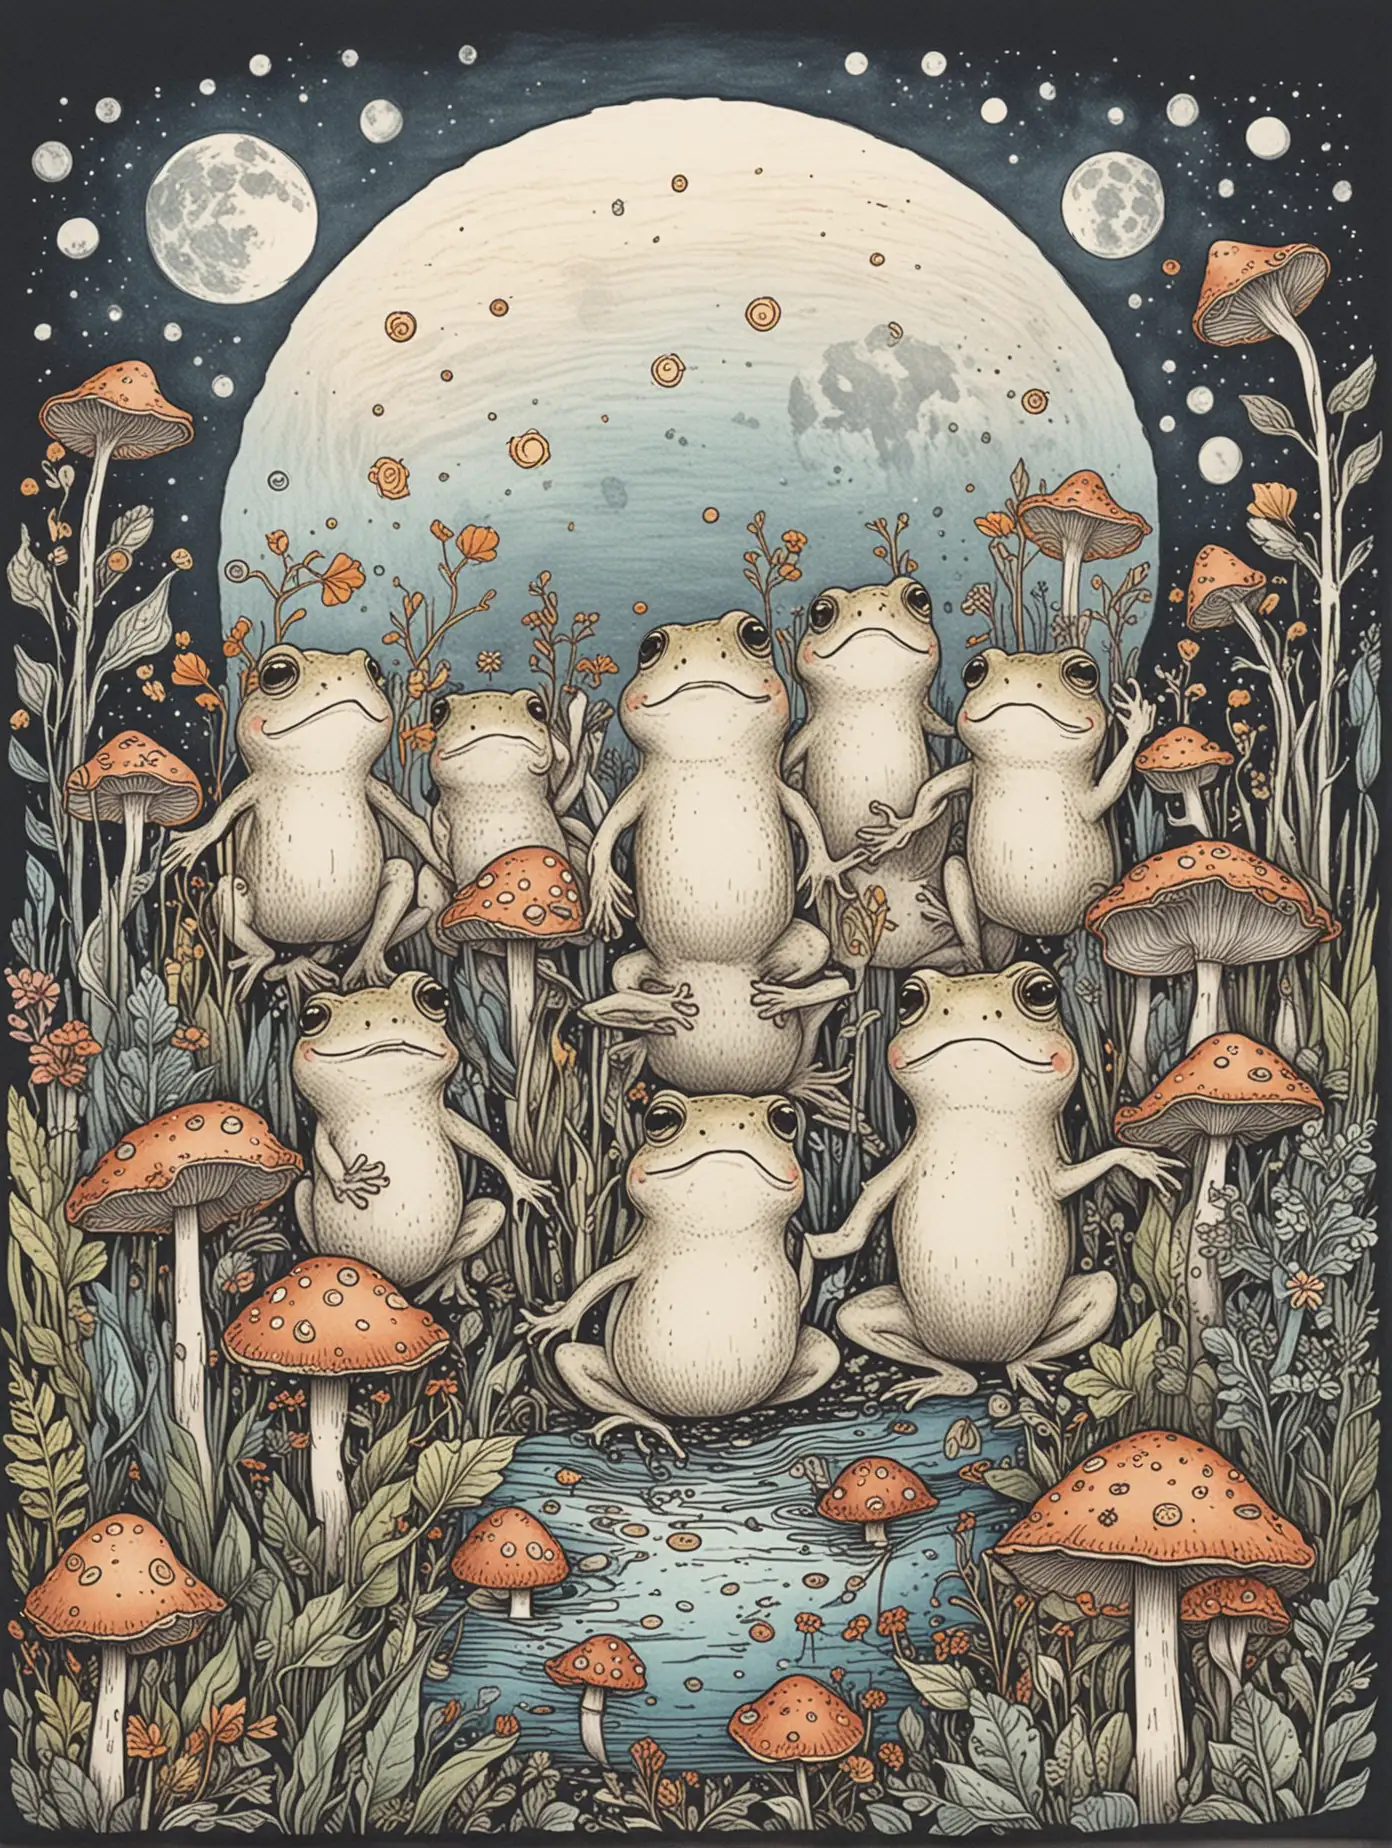 Cheerful Moonlit Night with Dancing Frogs and Mushrooms